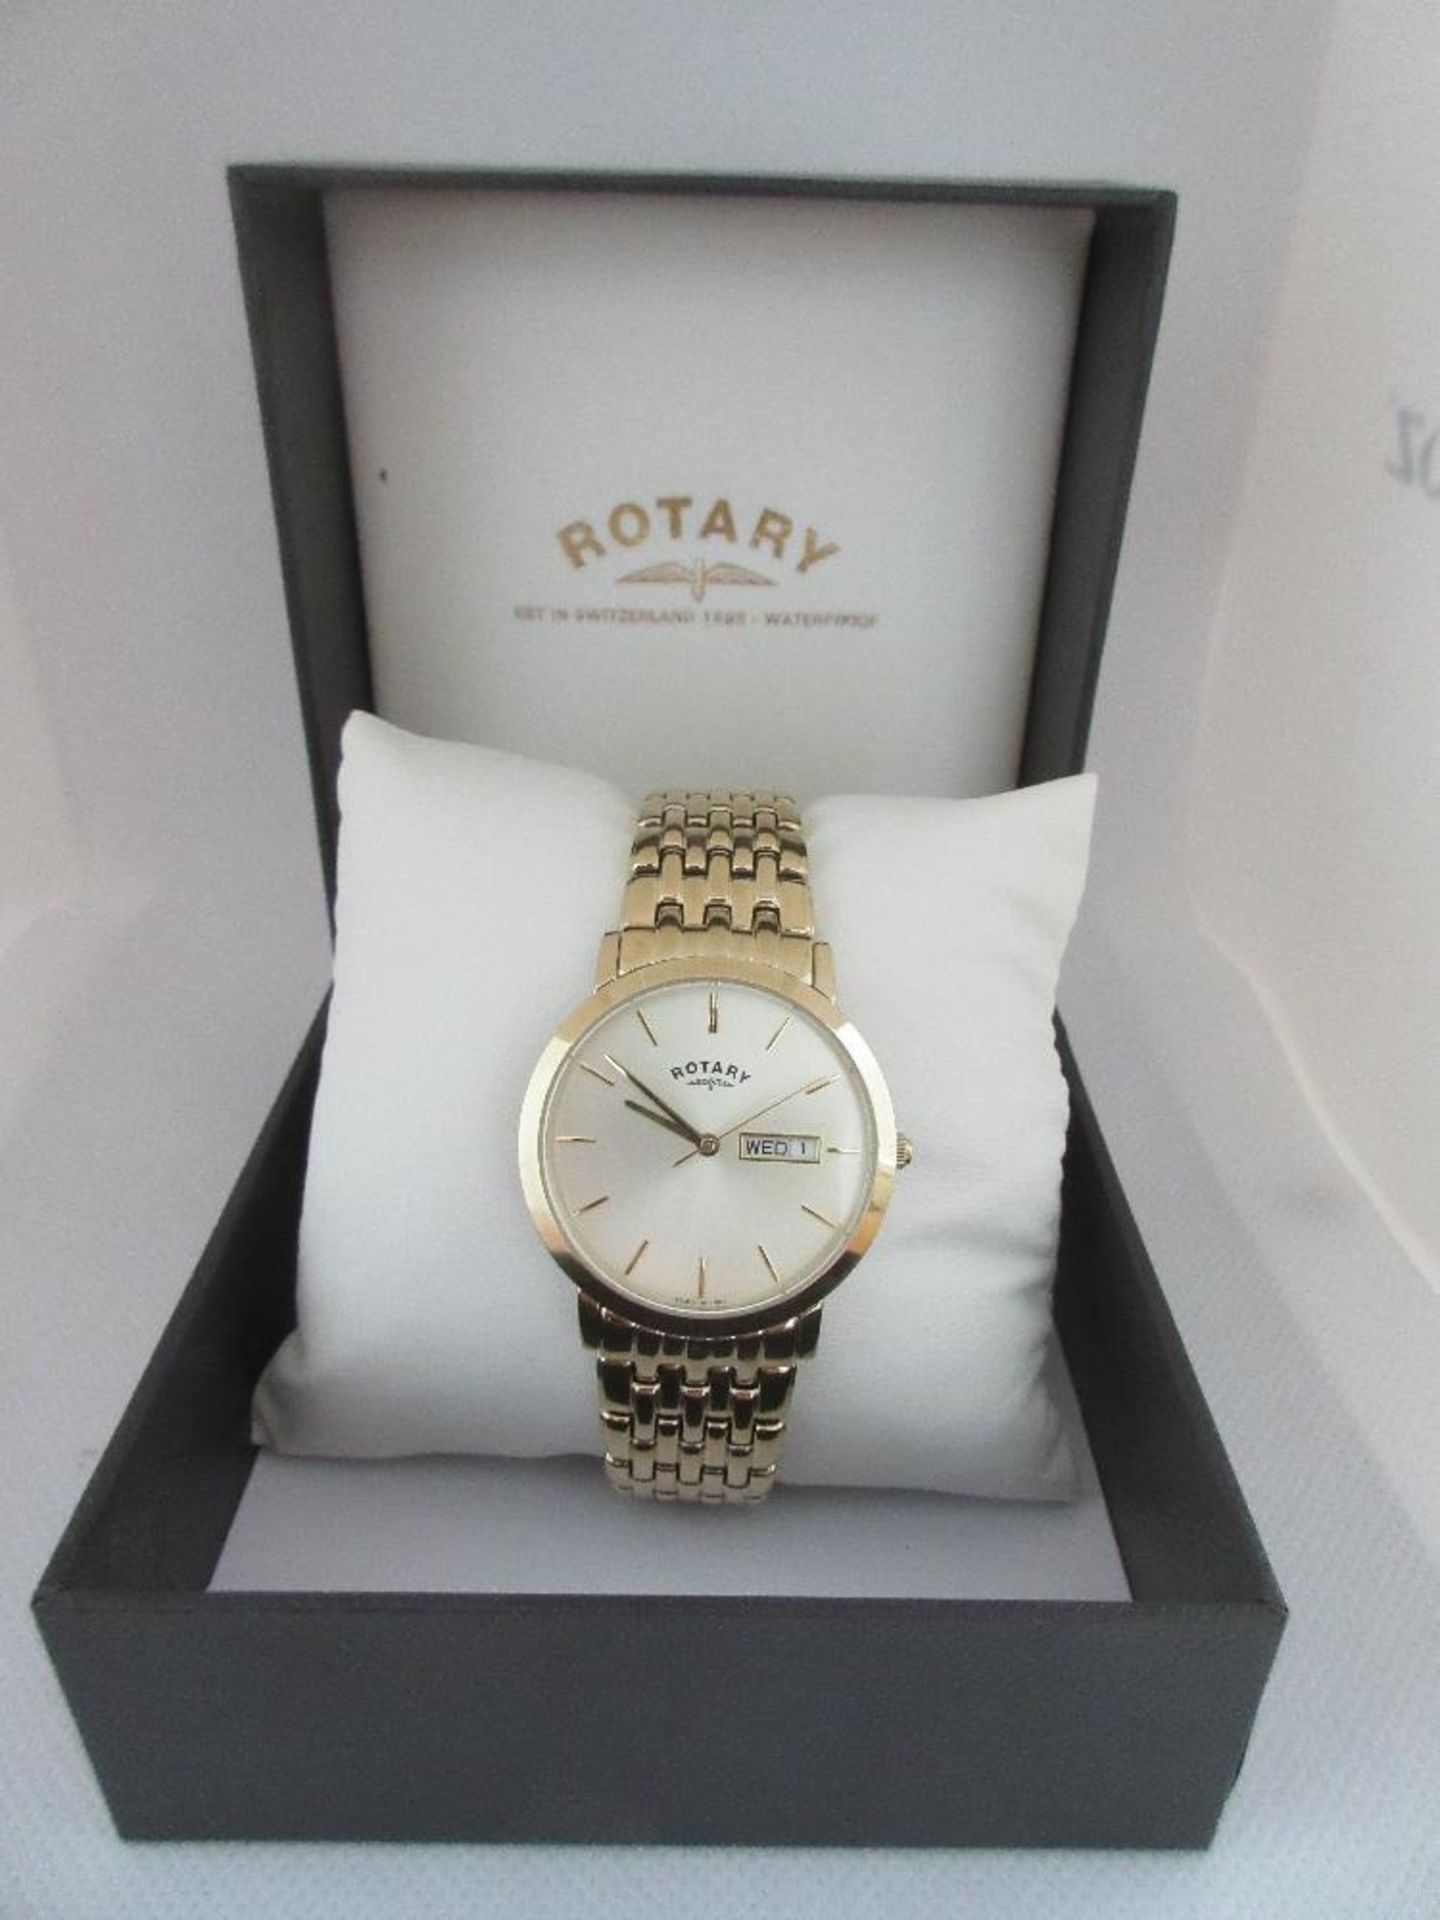 ROTARY MALE WATCH, MODEL GB102624/03, CASE DIAMETER 38MM, STAINLESS STEEL STRAP, BOXED, RRP £ 179